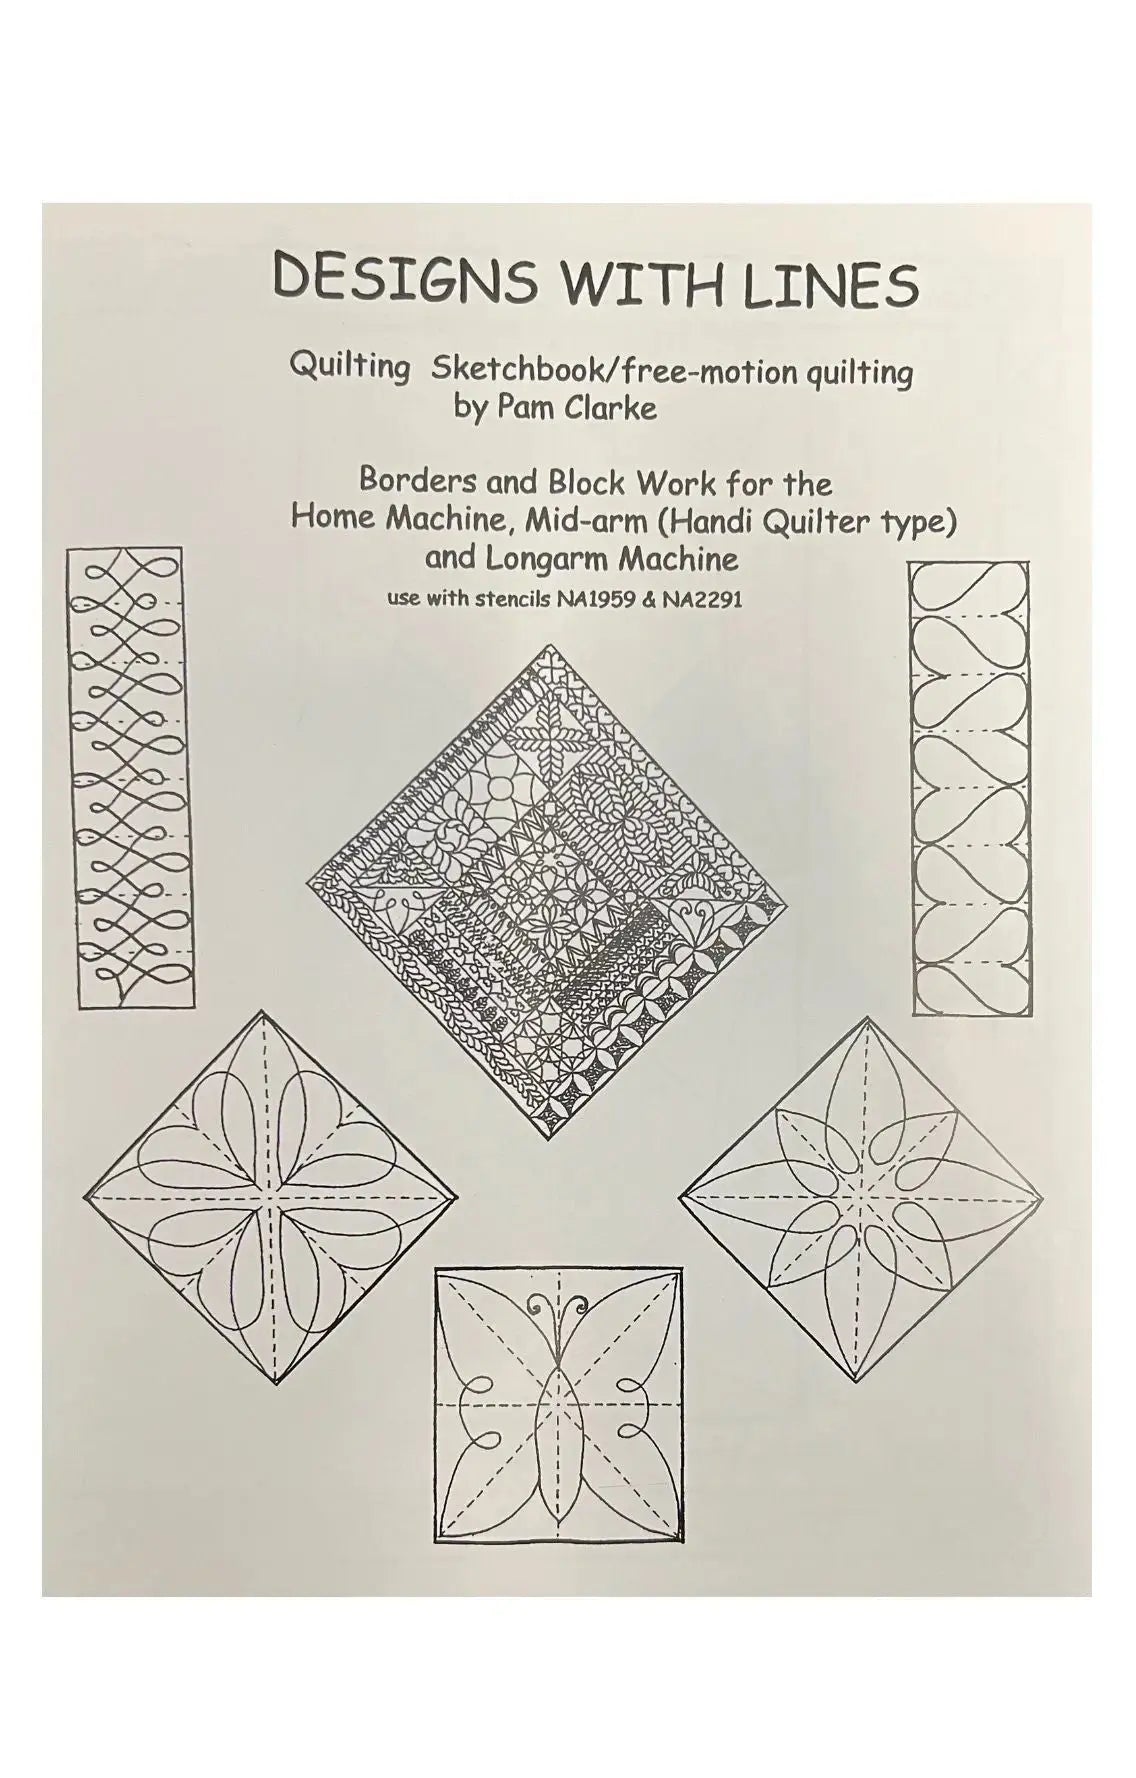 Designs with Lines Quilting Sketchbook/Free Motion Quilting for the Home, Mid-arm and Longarm Machine - Linda's Electric Quilters